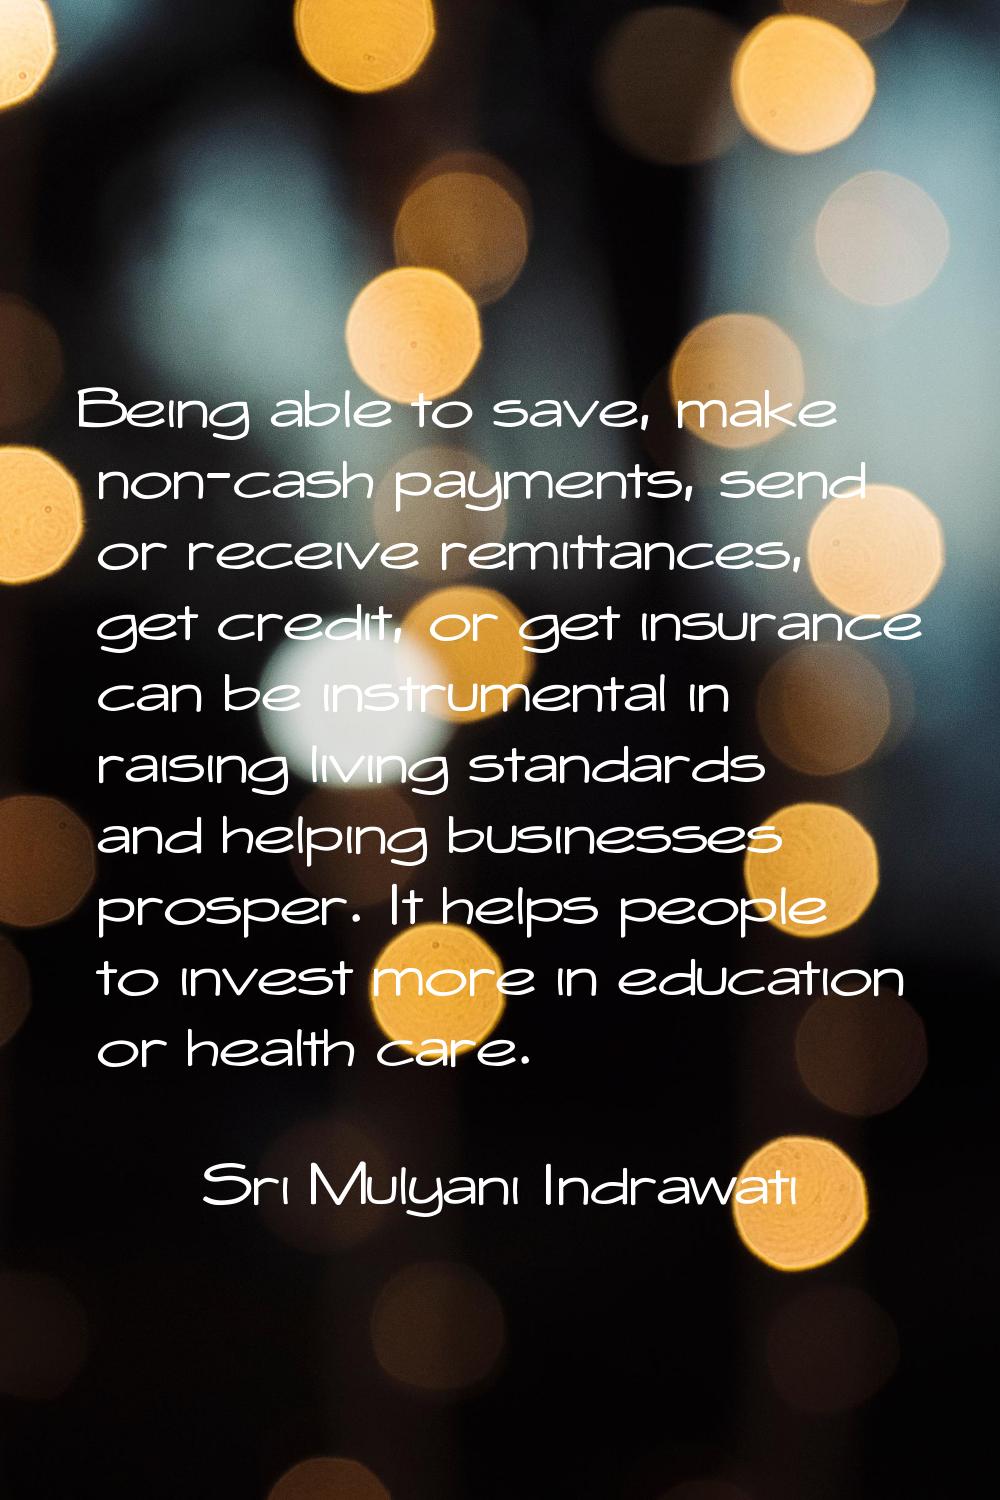 Being able to save, make non-cash payments, send or receive remittances, get credit, or get insuran